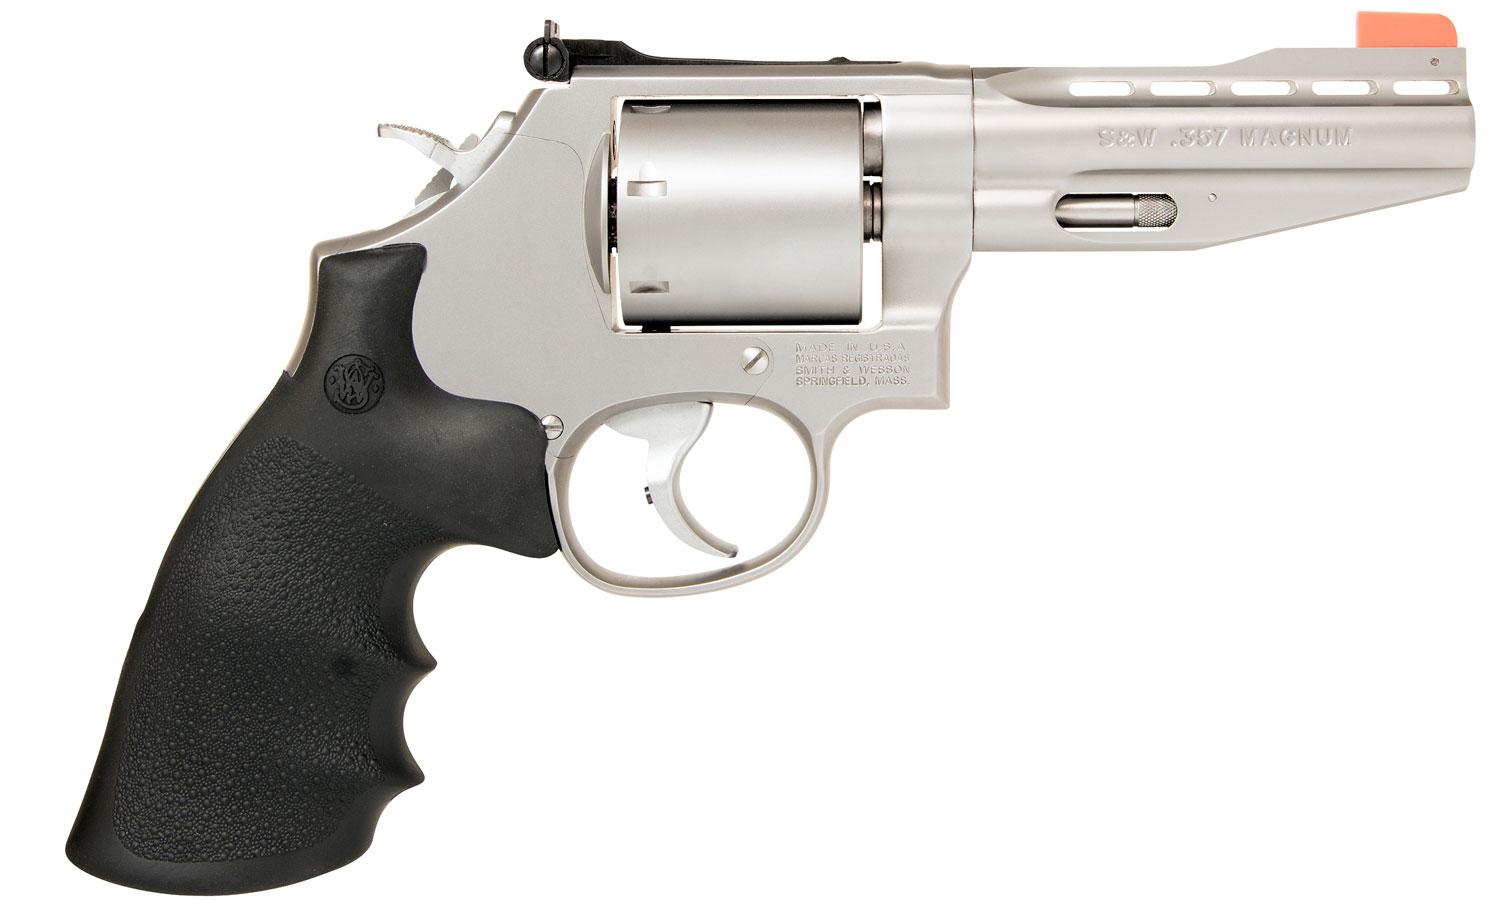 Smith & Wesson 686 Performance Center Revolver 11759, 357 Mag, 4", Black Synthetic Grips, Stainless Steel Finish, 6 Rd